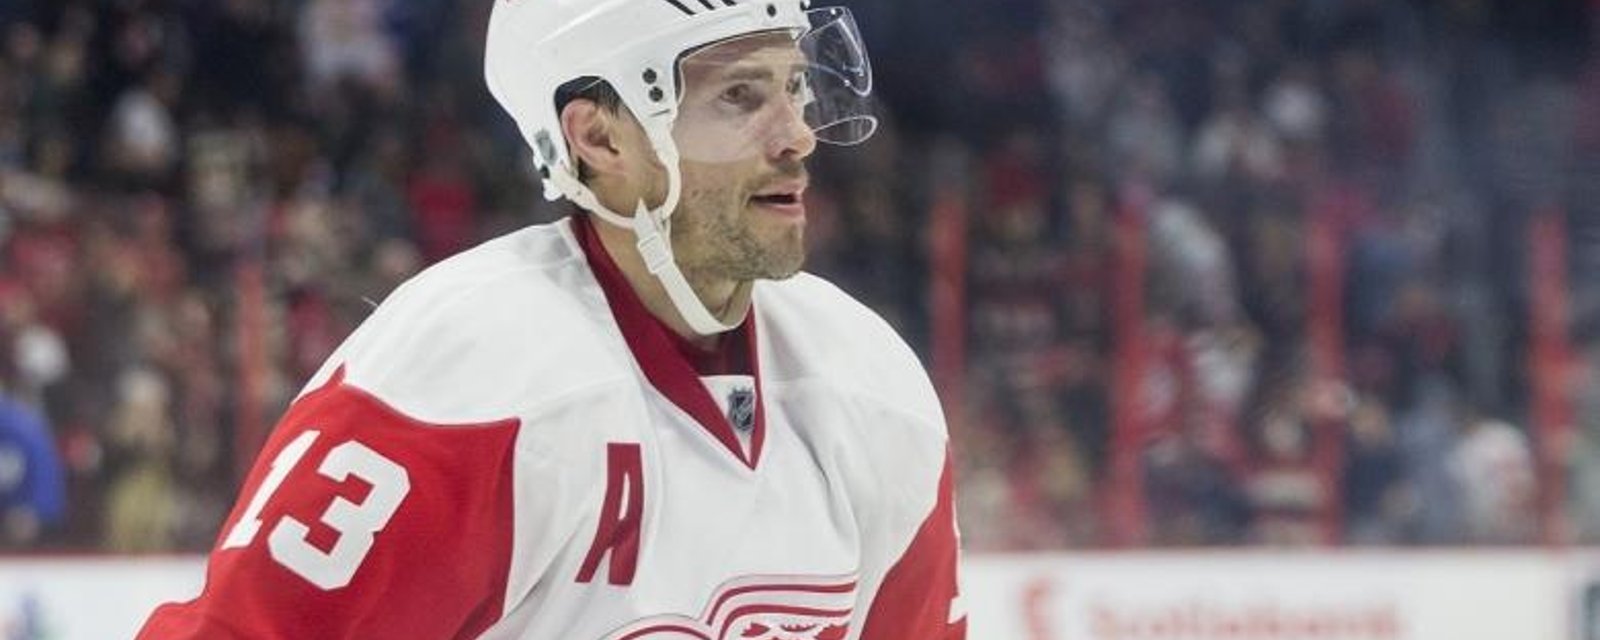 Shocking announcement from Datsyuk and a confusing decision from Detroit.